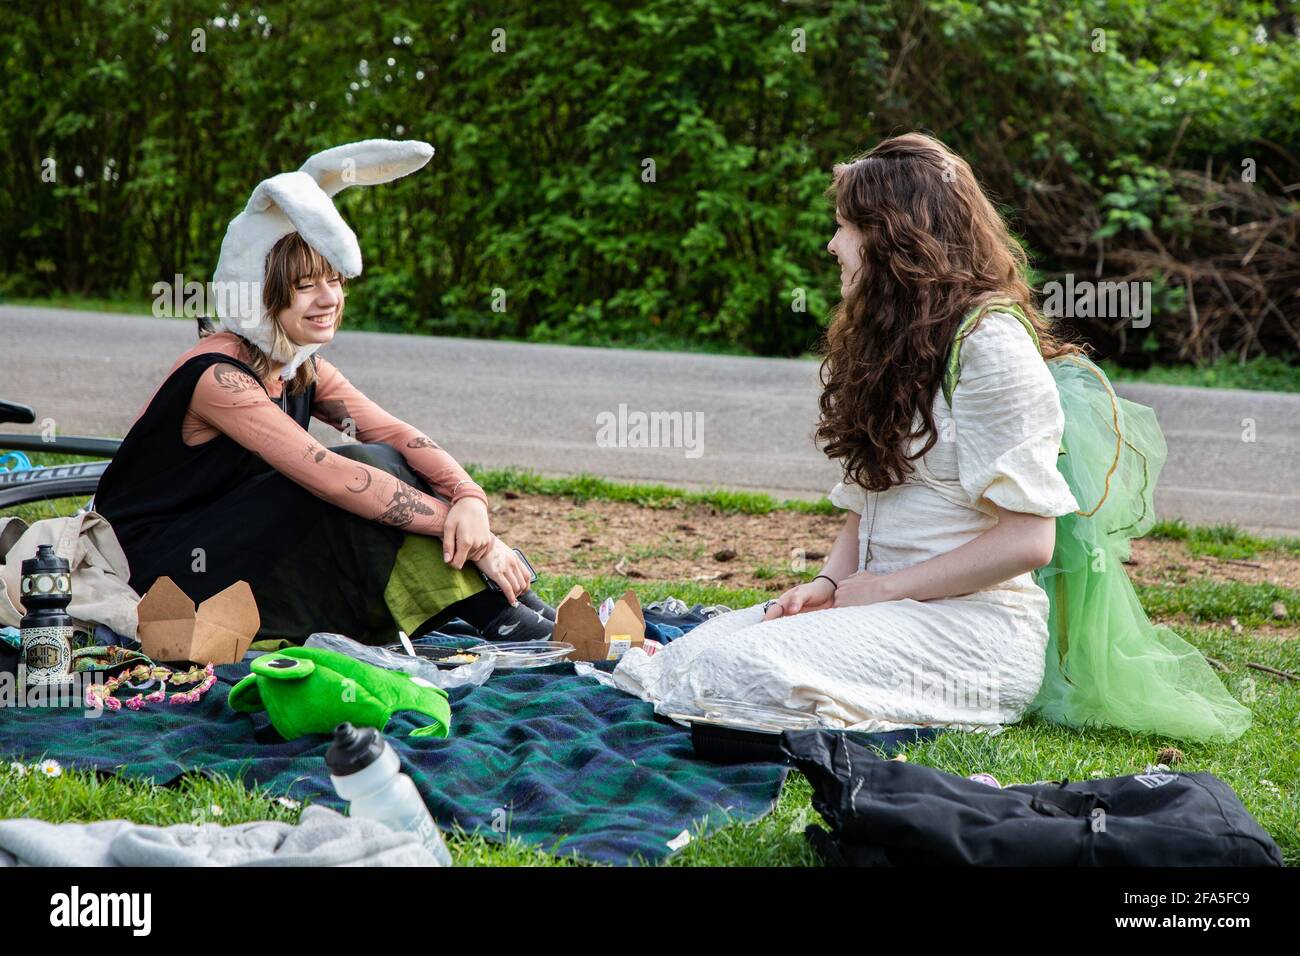 Portland, USA. 22nd Apr, 2021. People attend an Earth Day celebration organized by the Sunrise Movement, a youth-led environmental activism group, on April 22, 2021 in Mt. Tabor Park, Portland, Oregon. (Photo by Gaspard Le Dem/Sipa USA) Credit: Sipa USA/Alamy Live News Stock Photo